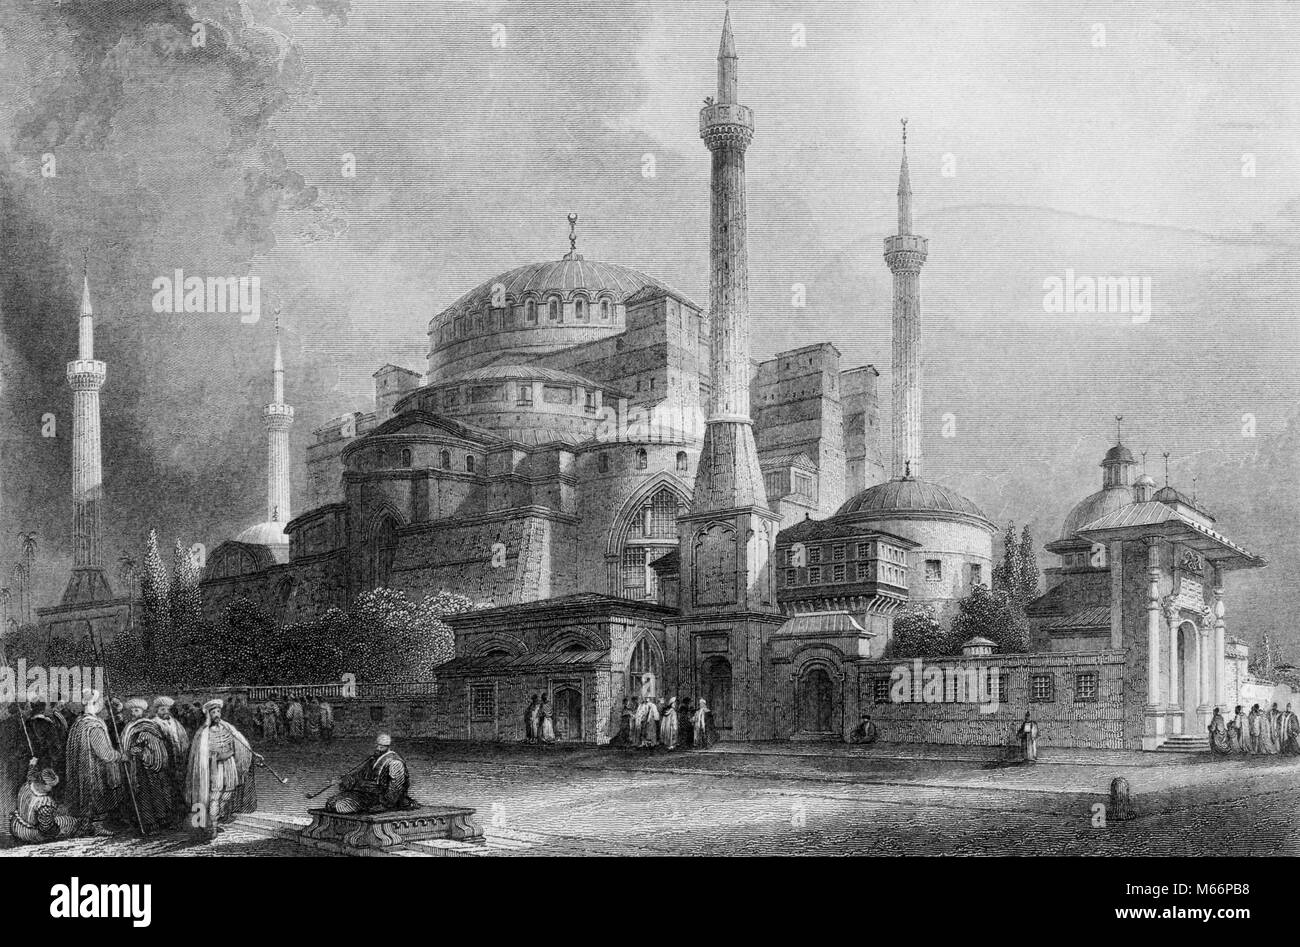 1800s ST. SOPHIA CHURCH IN CONSTANTINOPLE ISTANBUL CHURCH BECAME A MOSQUE IS NOW A MUSEUM HAGIA SOPHIA - q68014 CPC001 HARS TURKISH Stock Photo